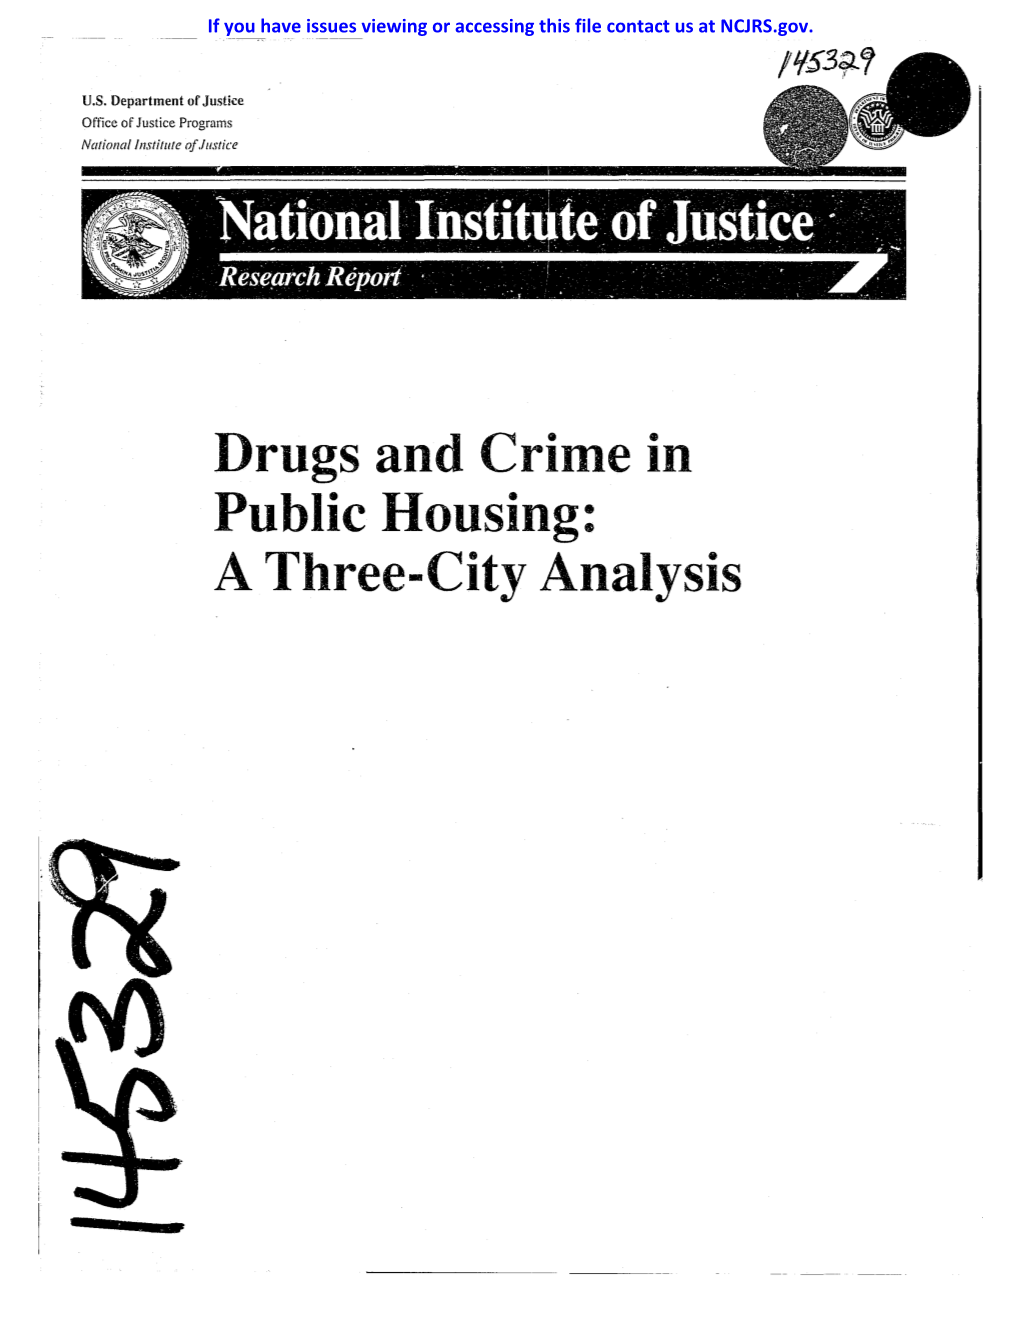 Drugs and Crime in Public Housing: a Three-City Analysis